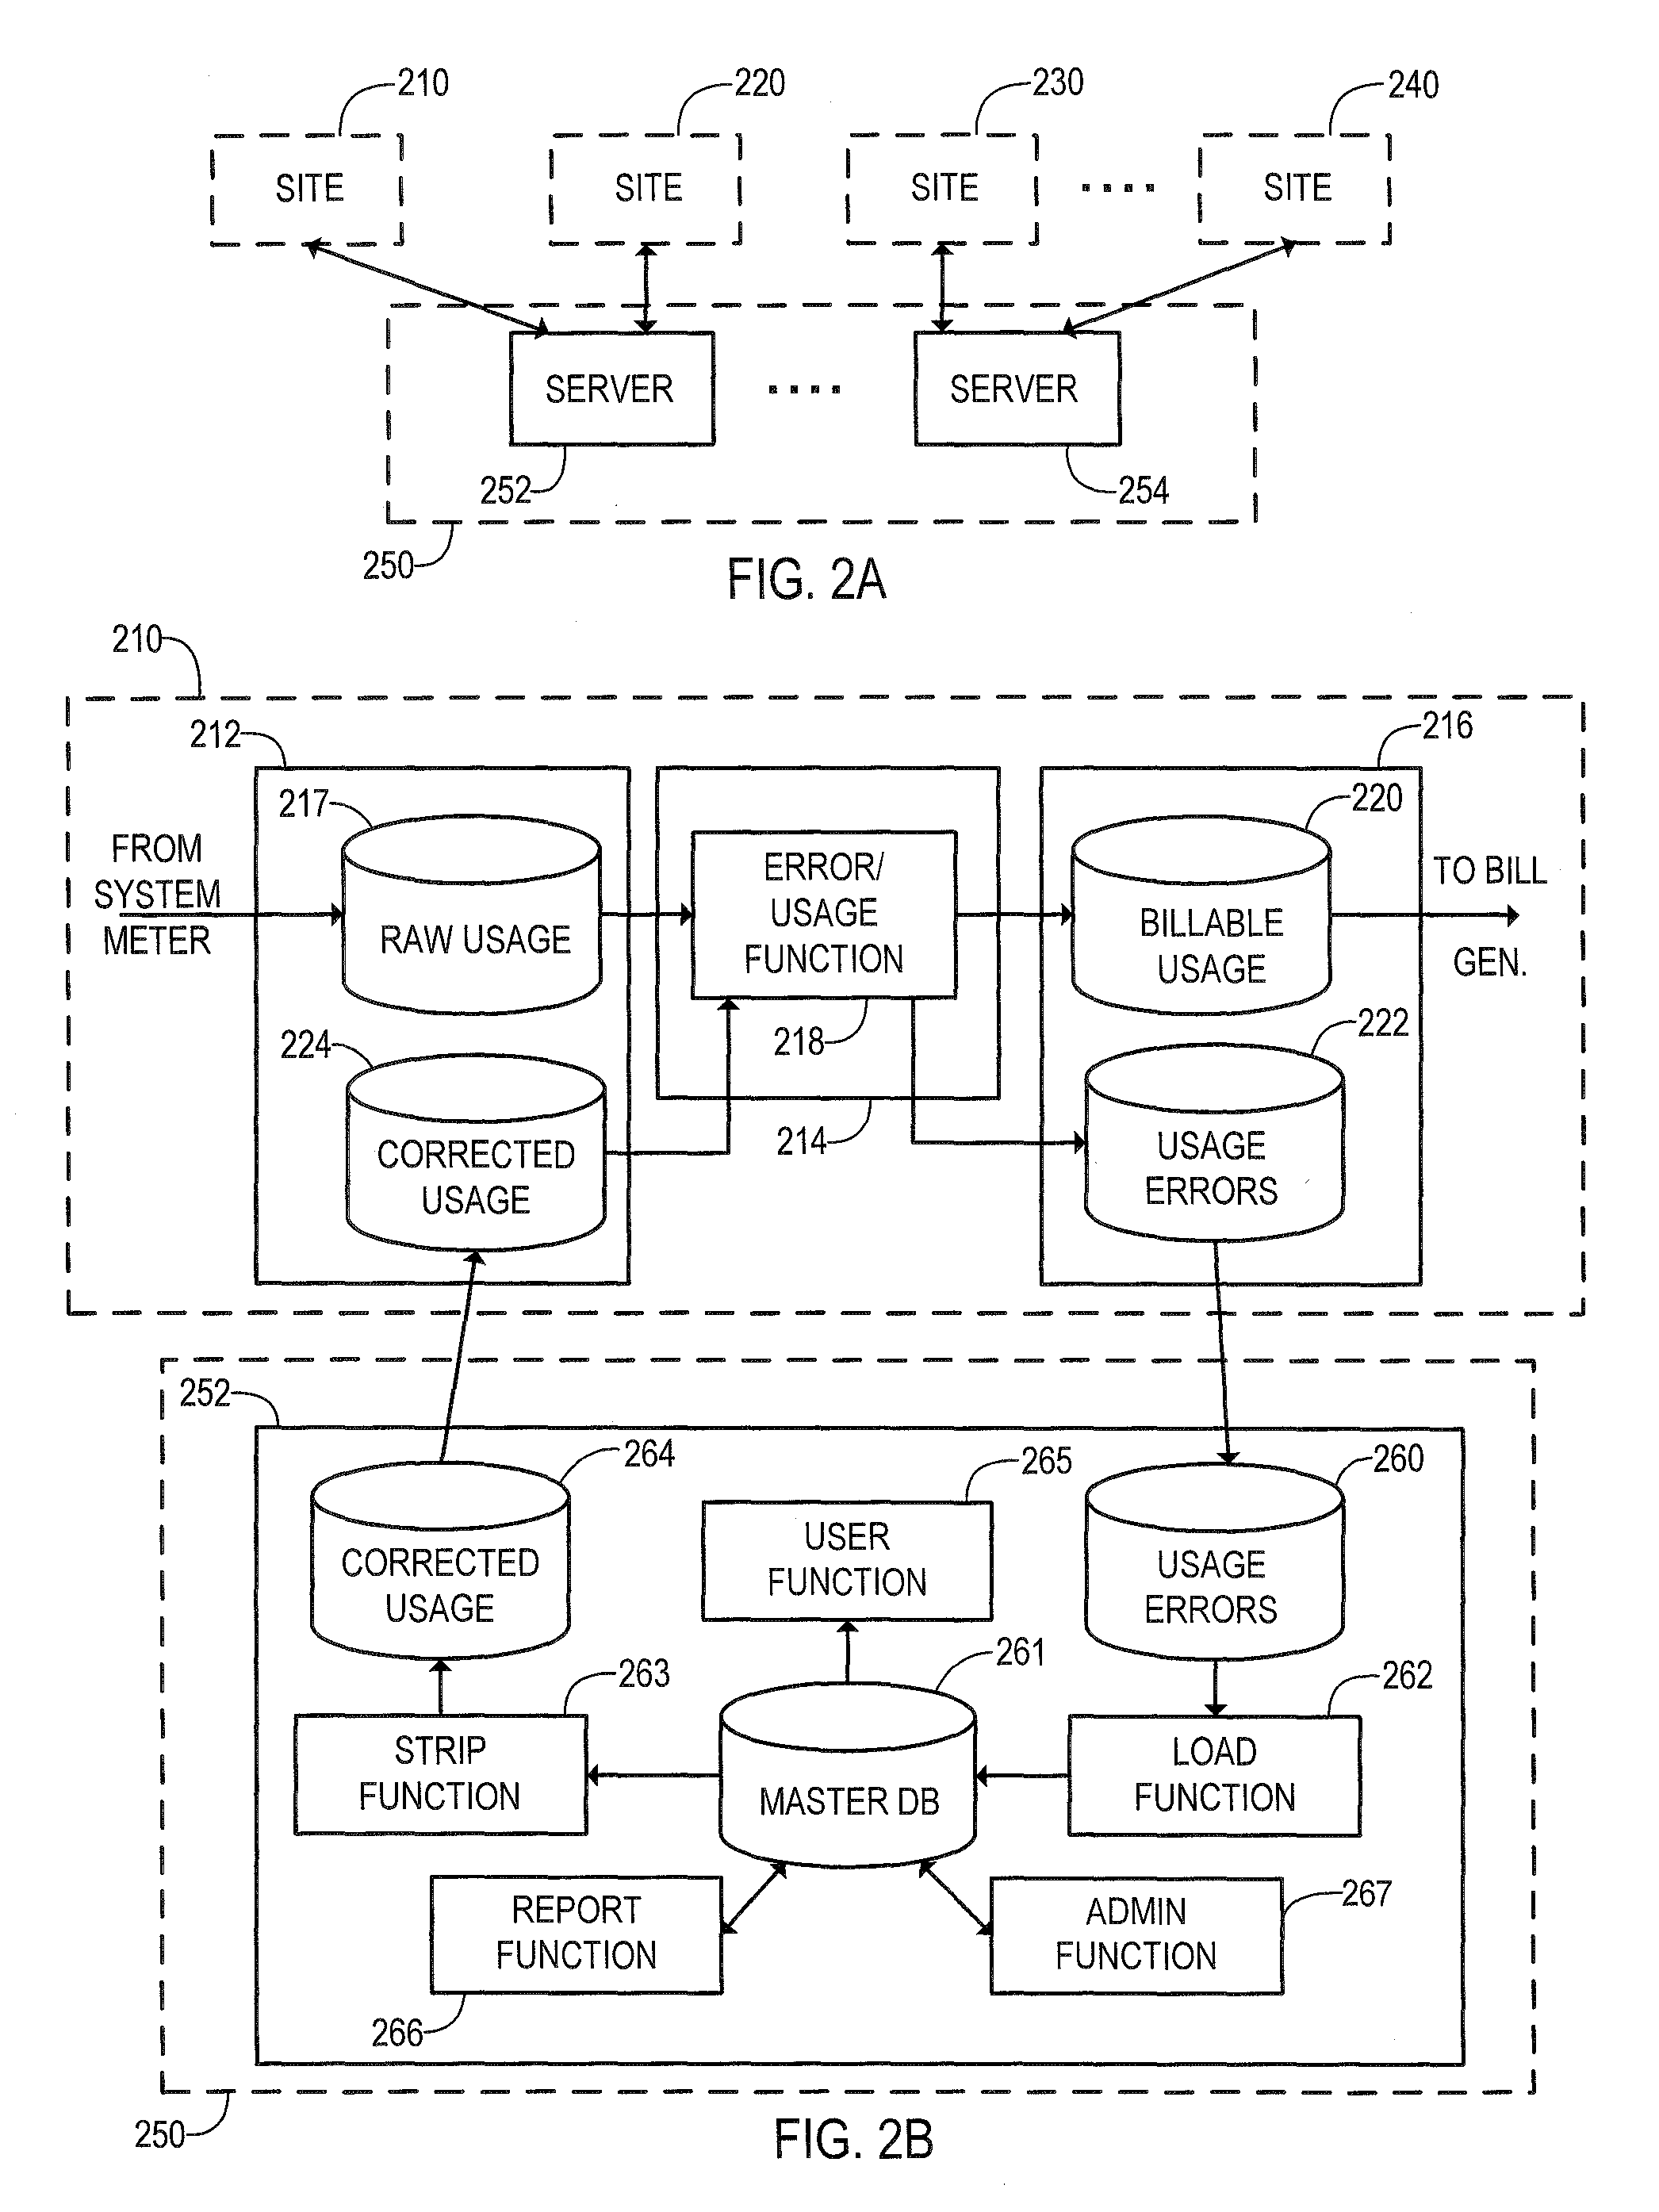 Method and system for server-based error processing in support of legacy-based usage and billing systems